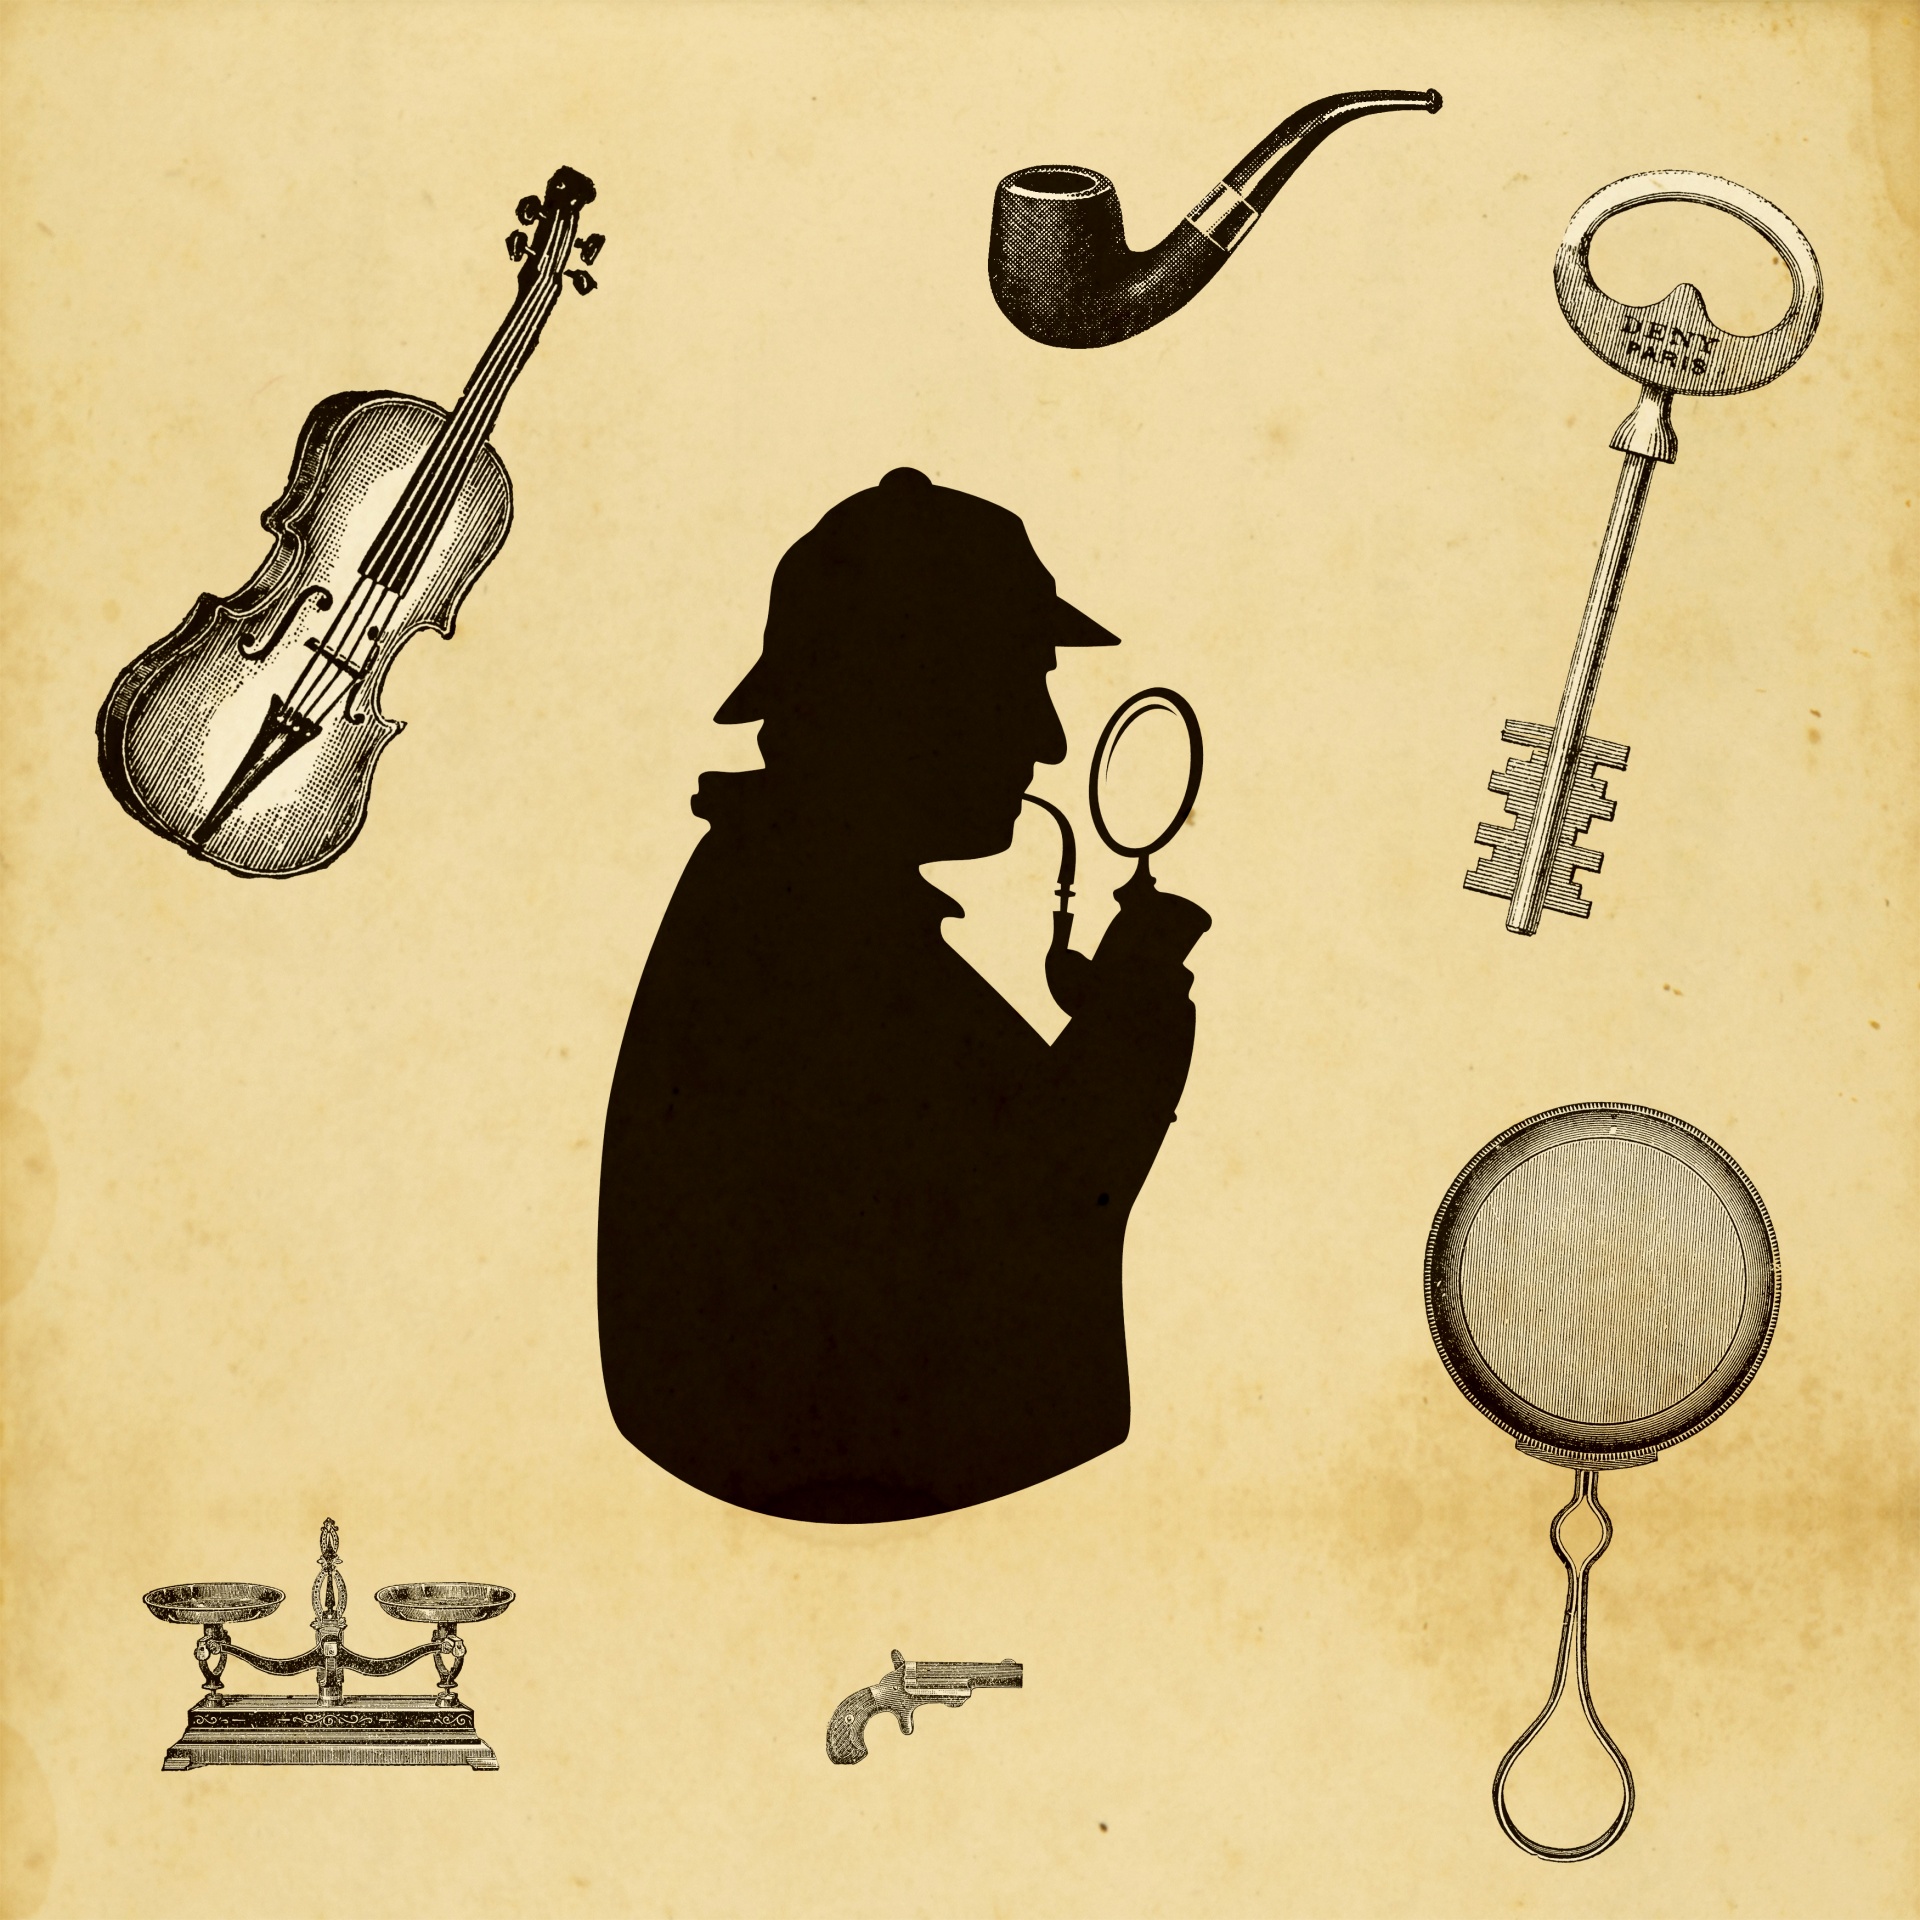 Silhouette of Sherlock Holmes and various related items on old antique paper background